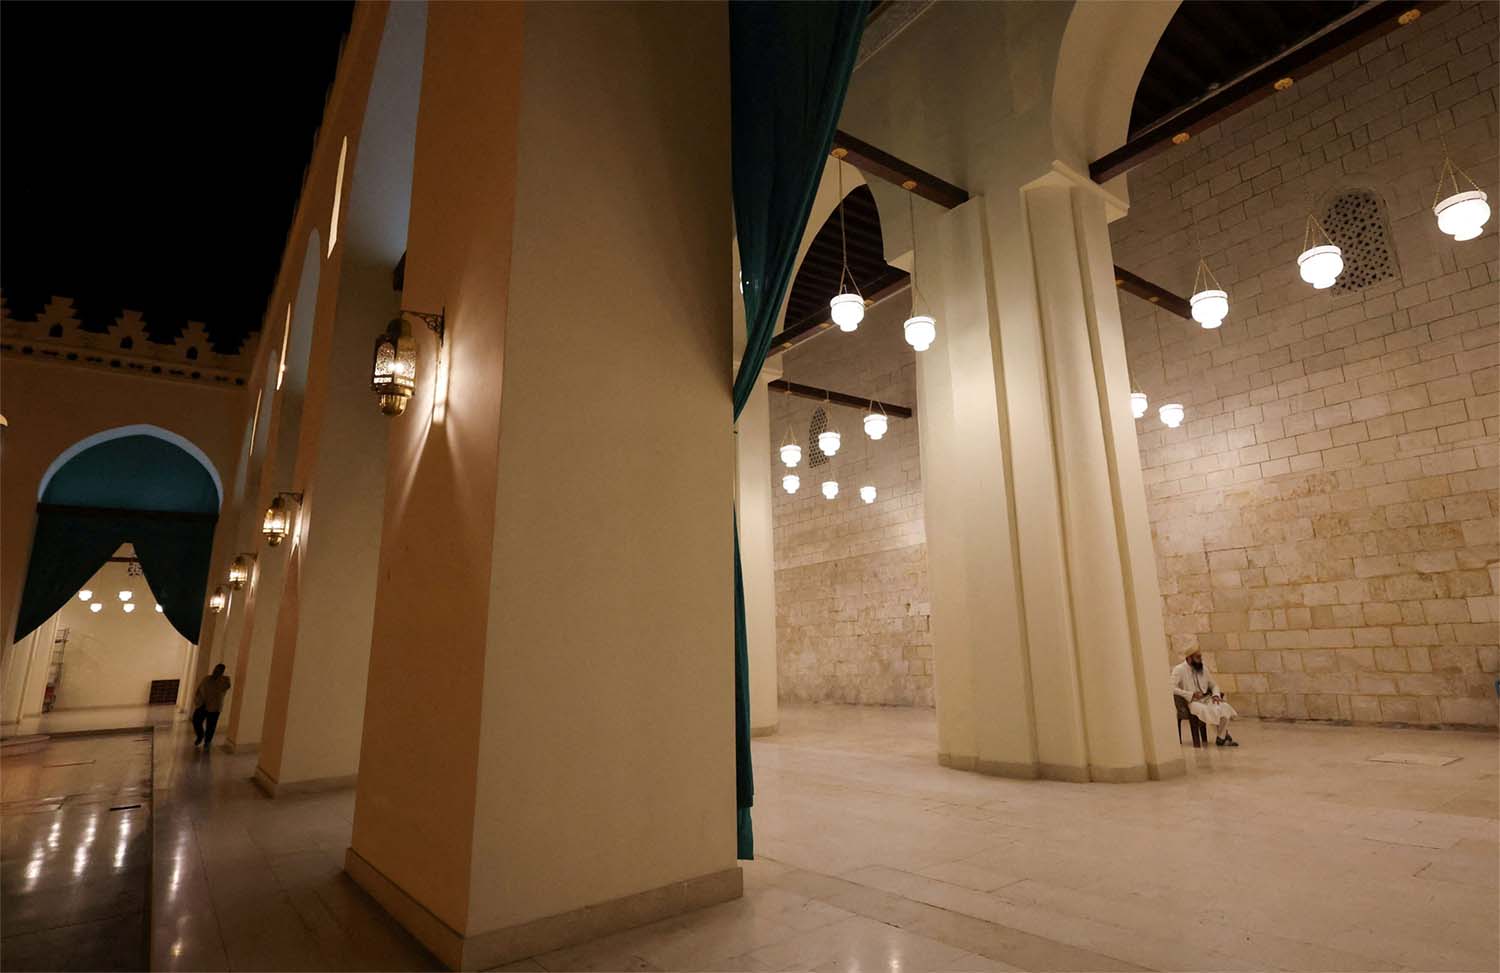 $2.8 million to restore the mosque